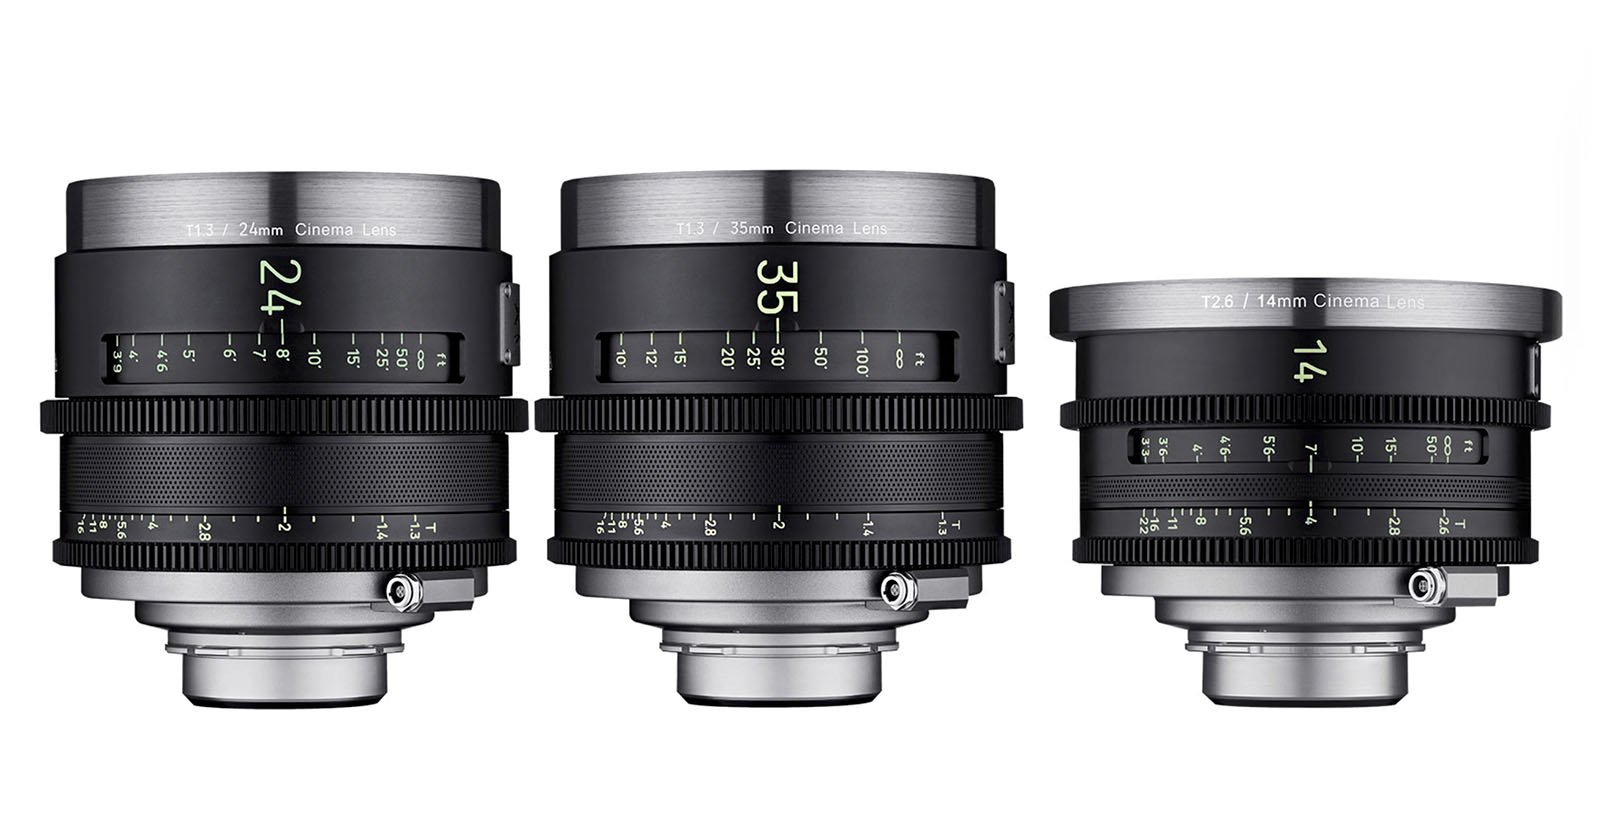 Samyangs XEEN Meister Series Goes Wide with 14mm and 24mm Primes